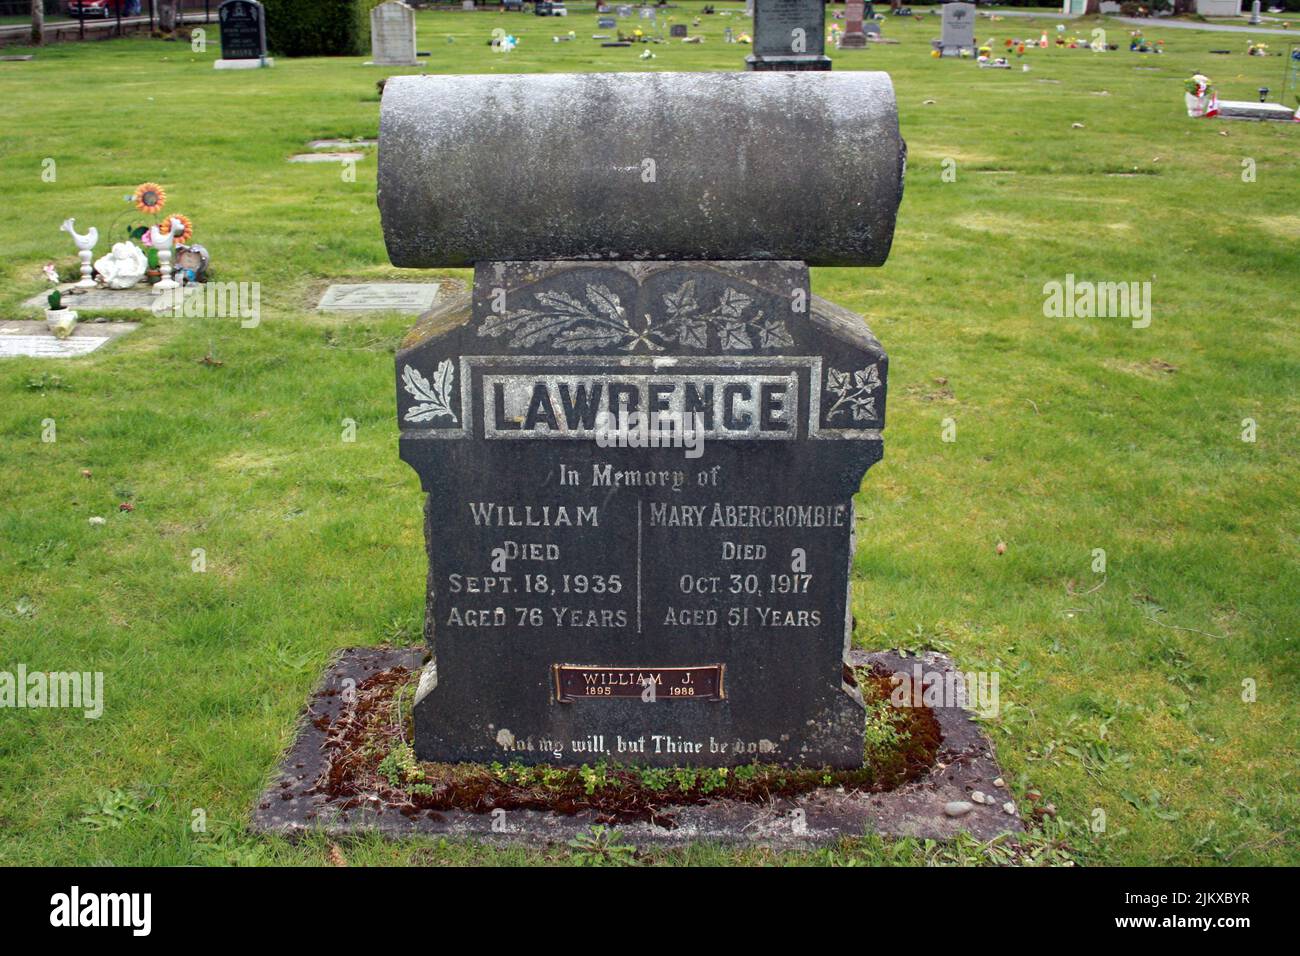 An Old tombstones of Lawrence in green land in Langley cemetery, British Columbia, Cana Stock Photo